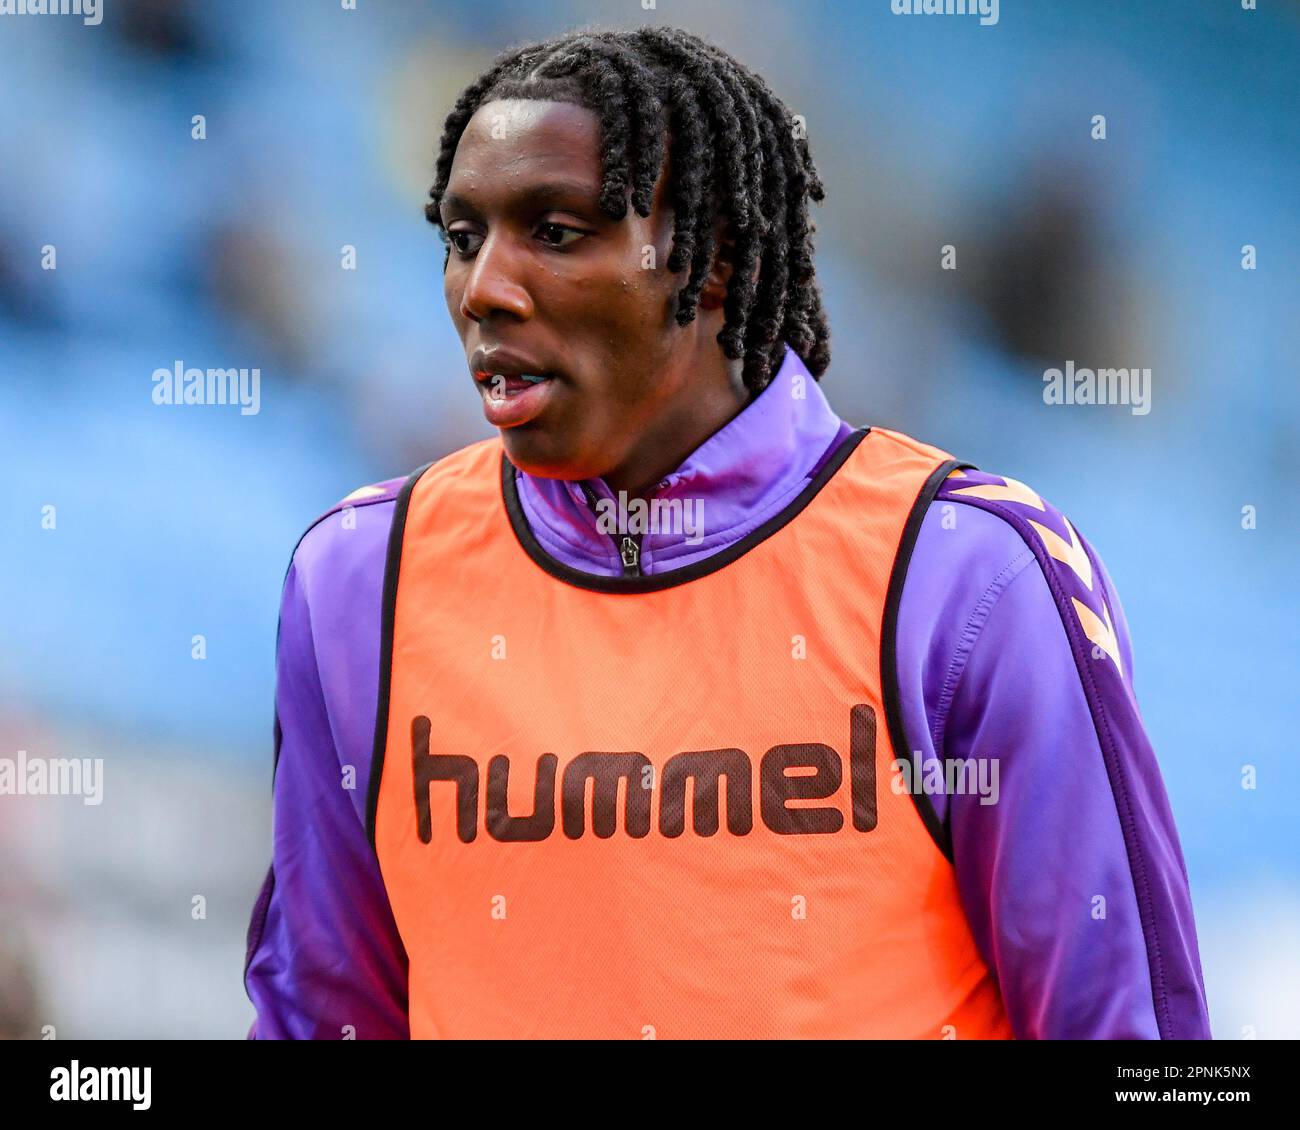 Callum Doyle #3 of Coventry City pre-match warm up ahead of the Sky Bet Championship match Blackburn Rovers vs Coventry City at Ewood Park, Blackburn, United Kingdom, 19th April 2023  (Photo by Ben Roberts/News Images) Stock Photo